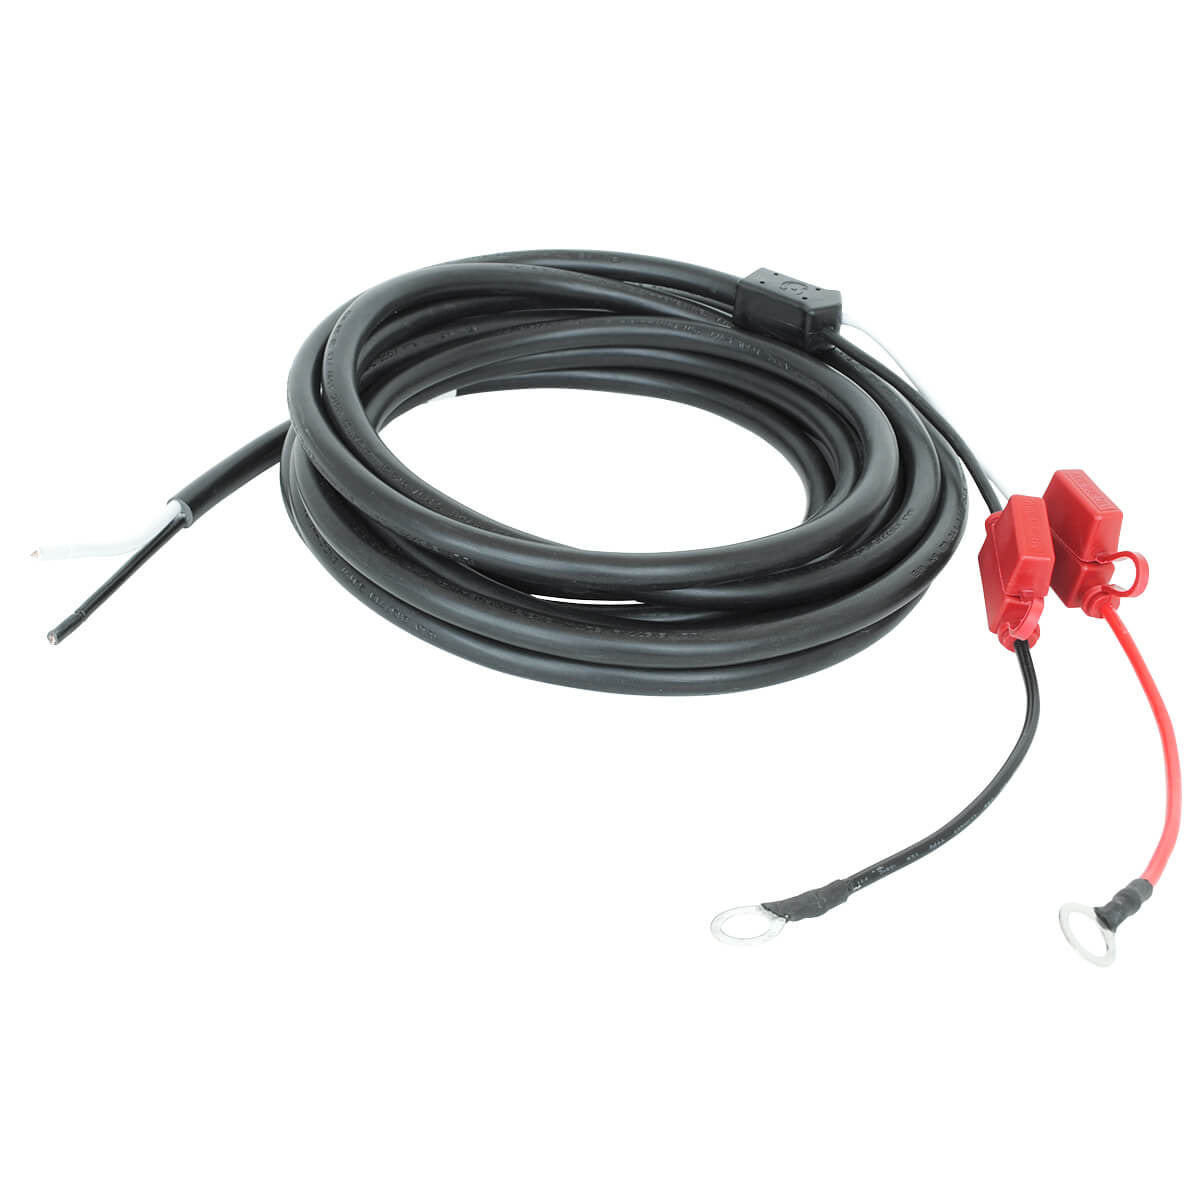 Minn Kota Battery Charger Extension Cable